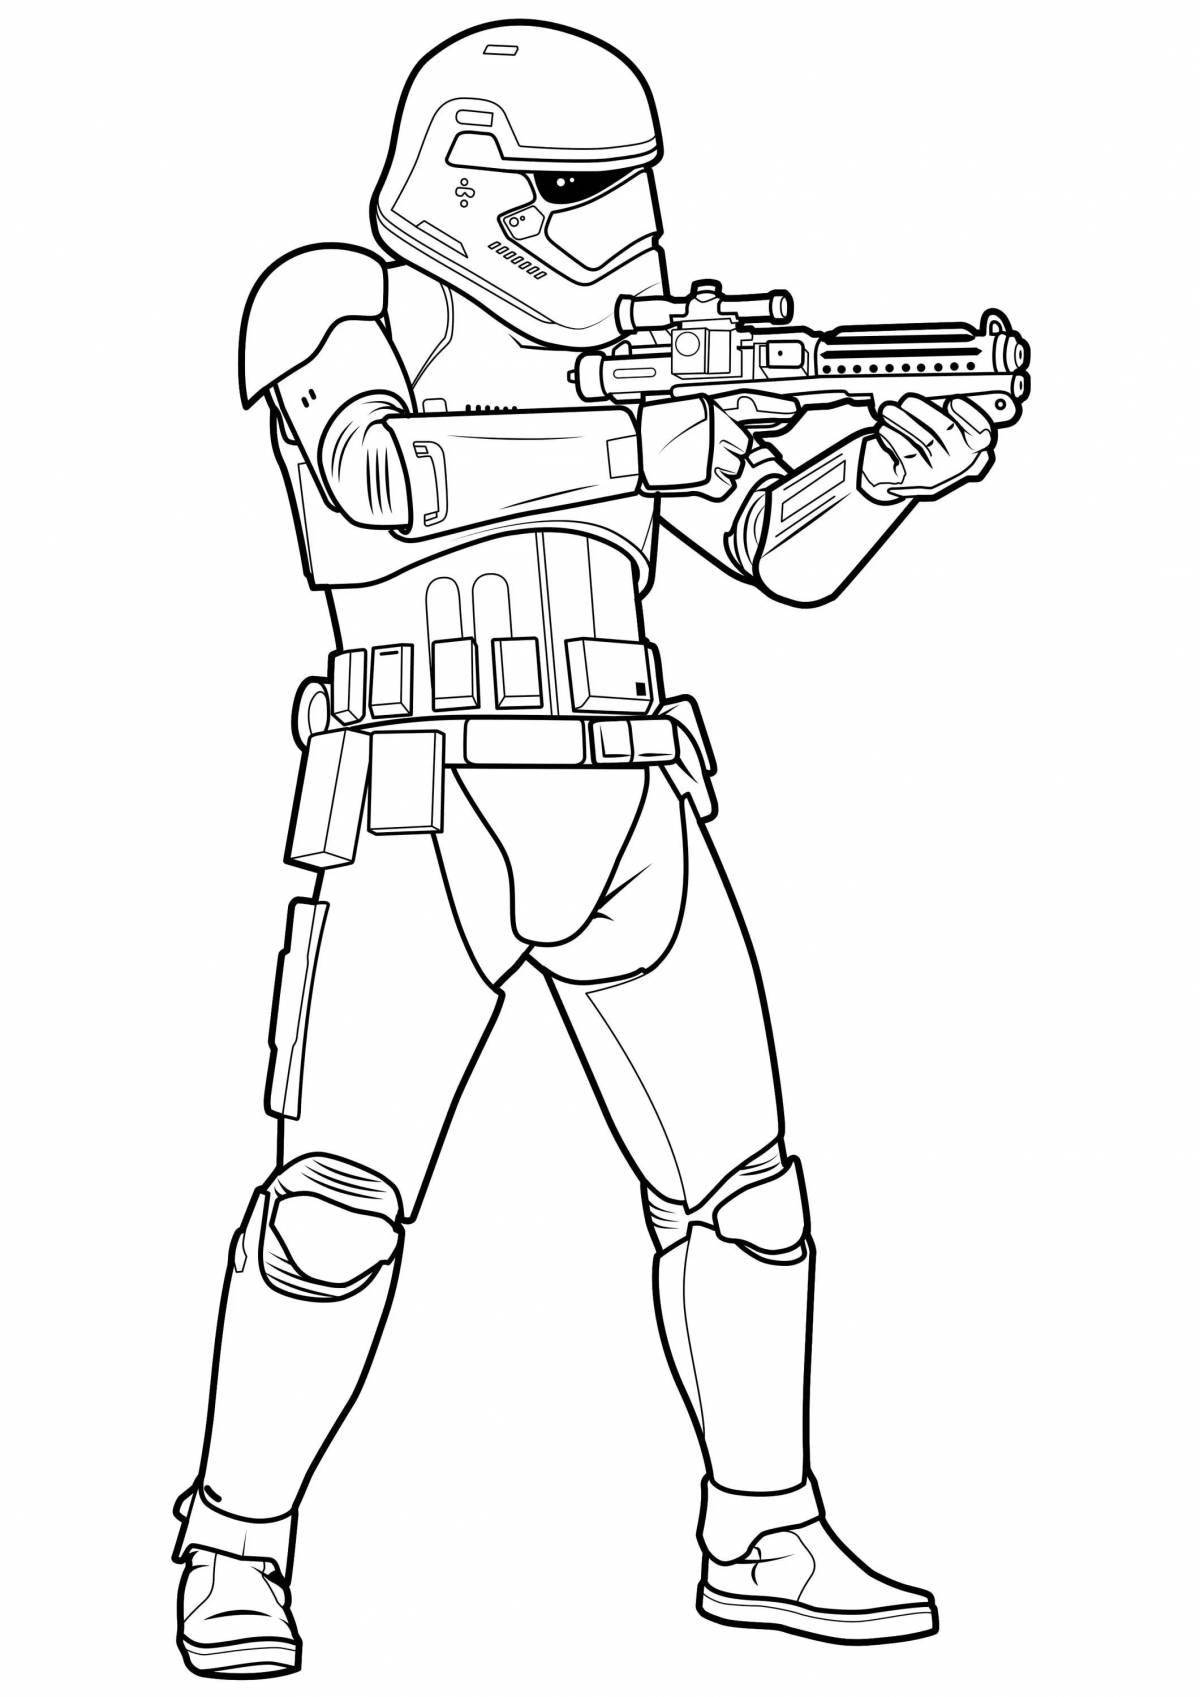 Majestic star wars stormtrooper coloring page